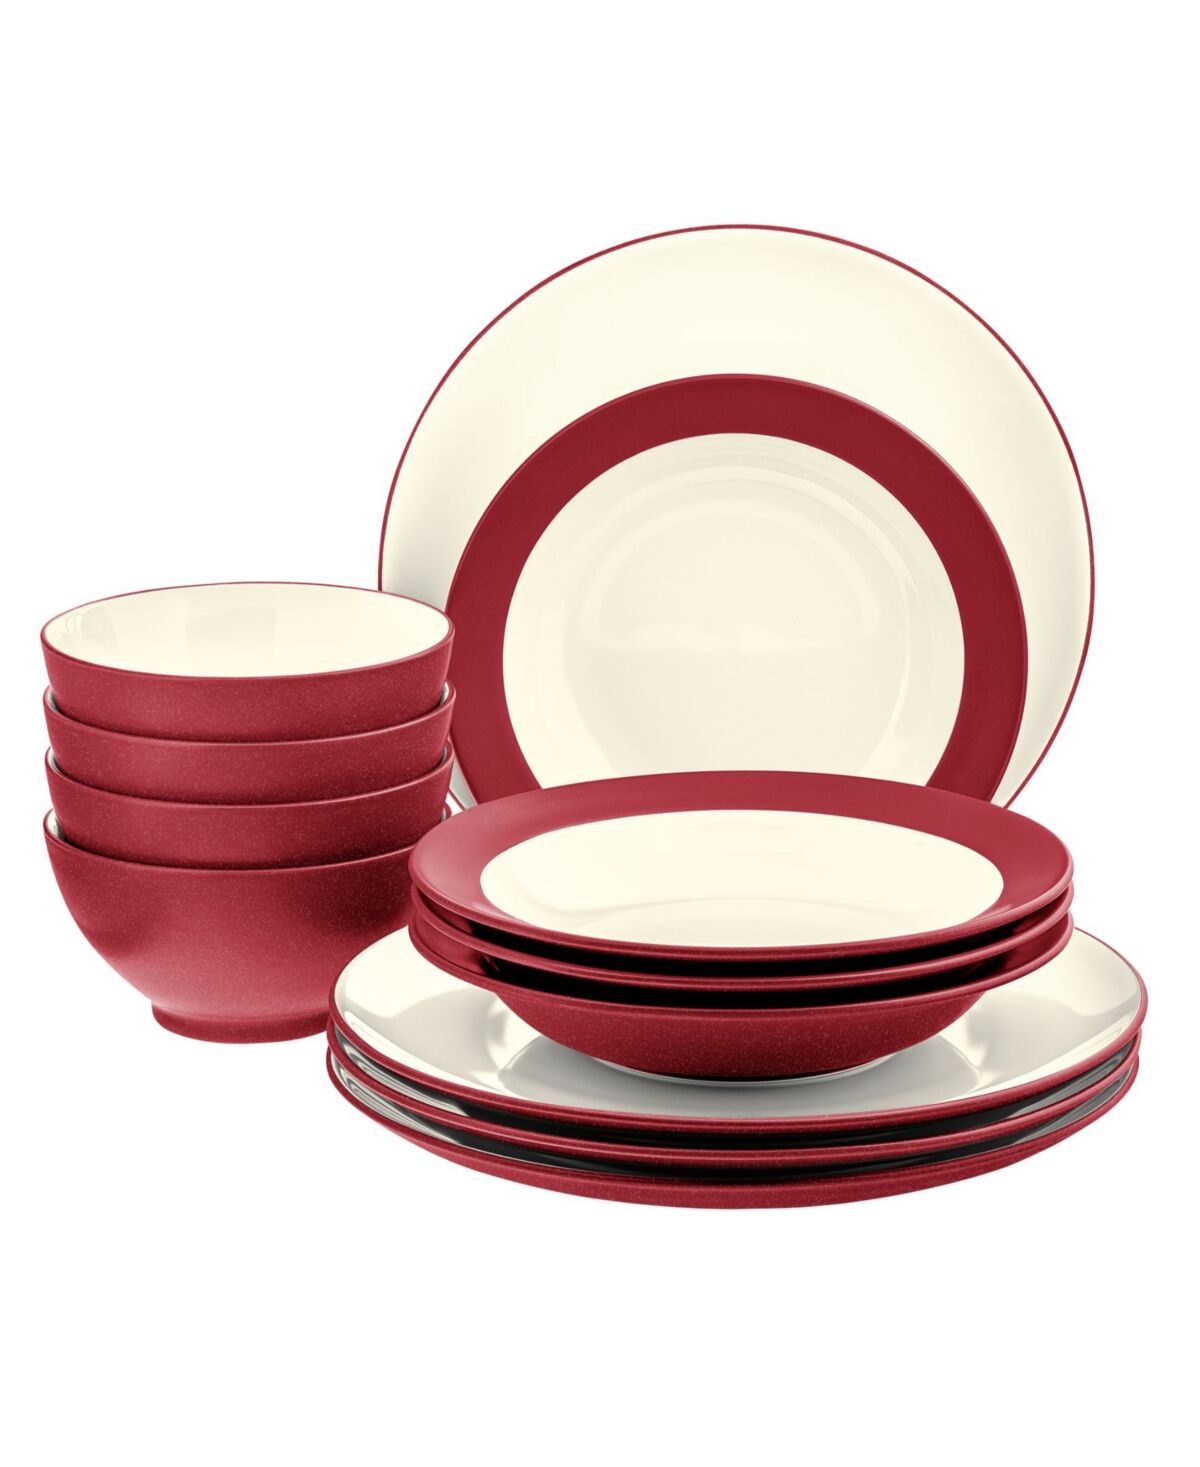 Noritake Colorwave Coupe 12-Piece Dinnerware Set, Service for 4, Created for Macy's - Raspberry